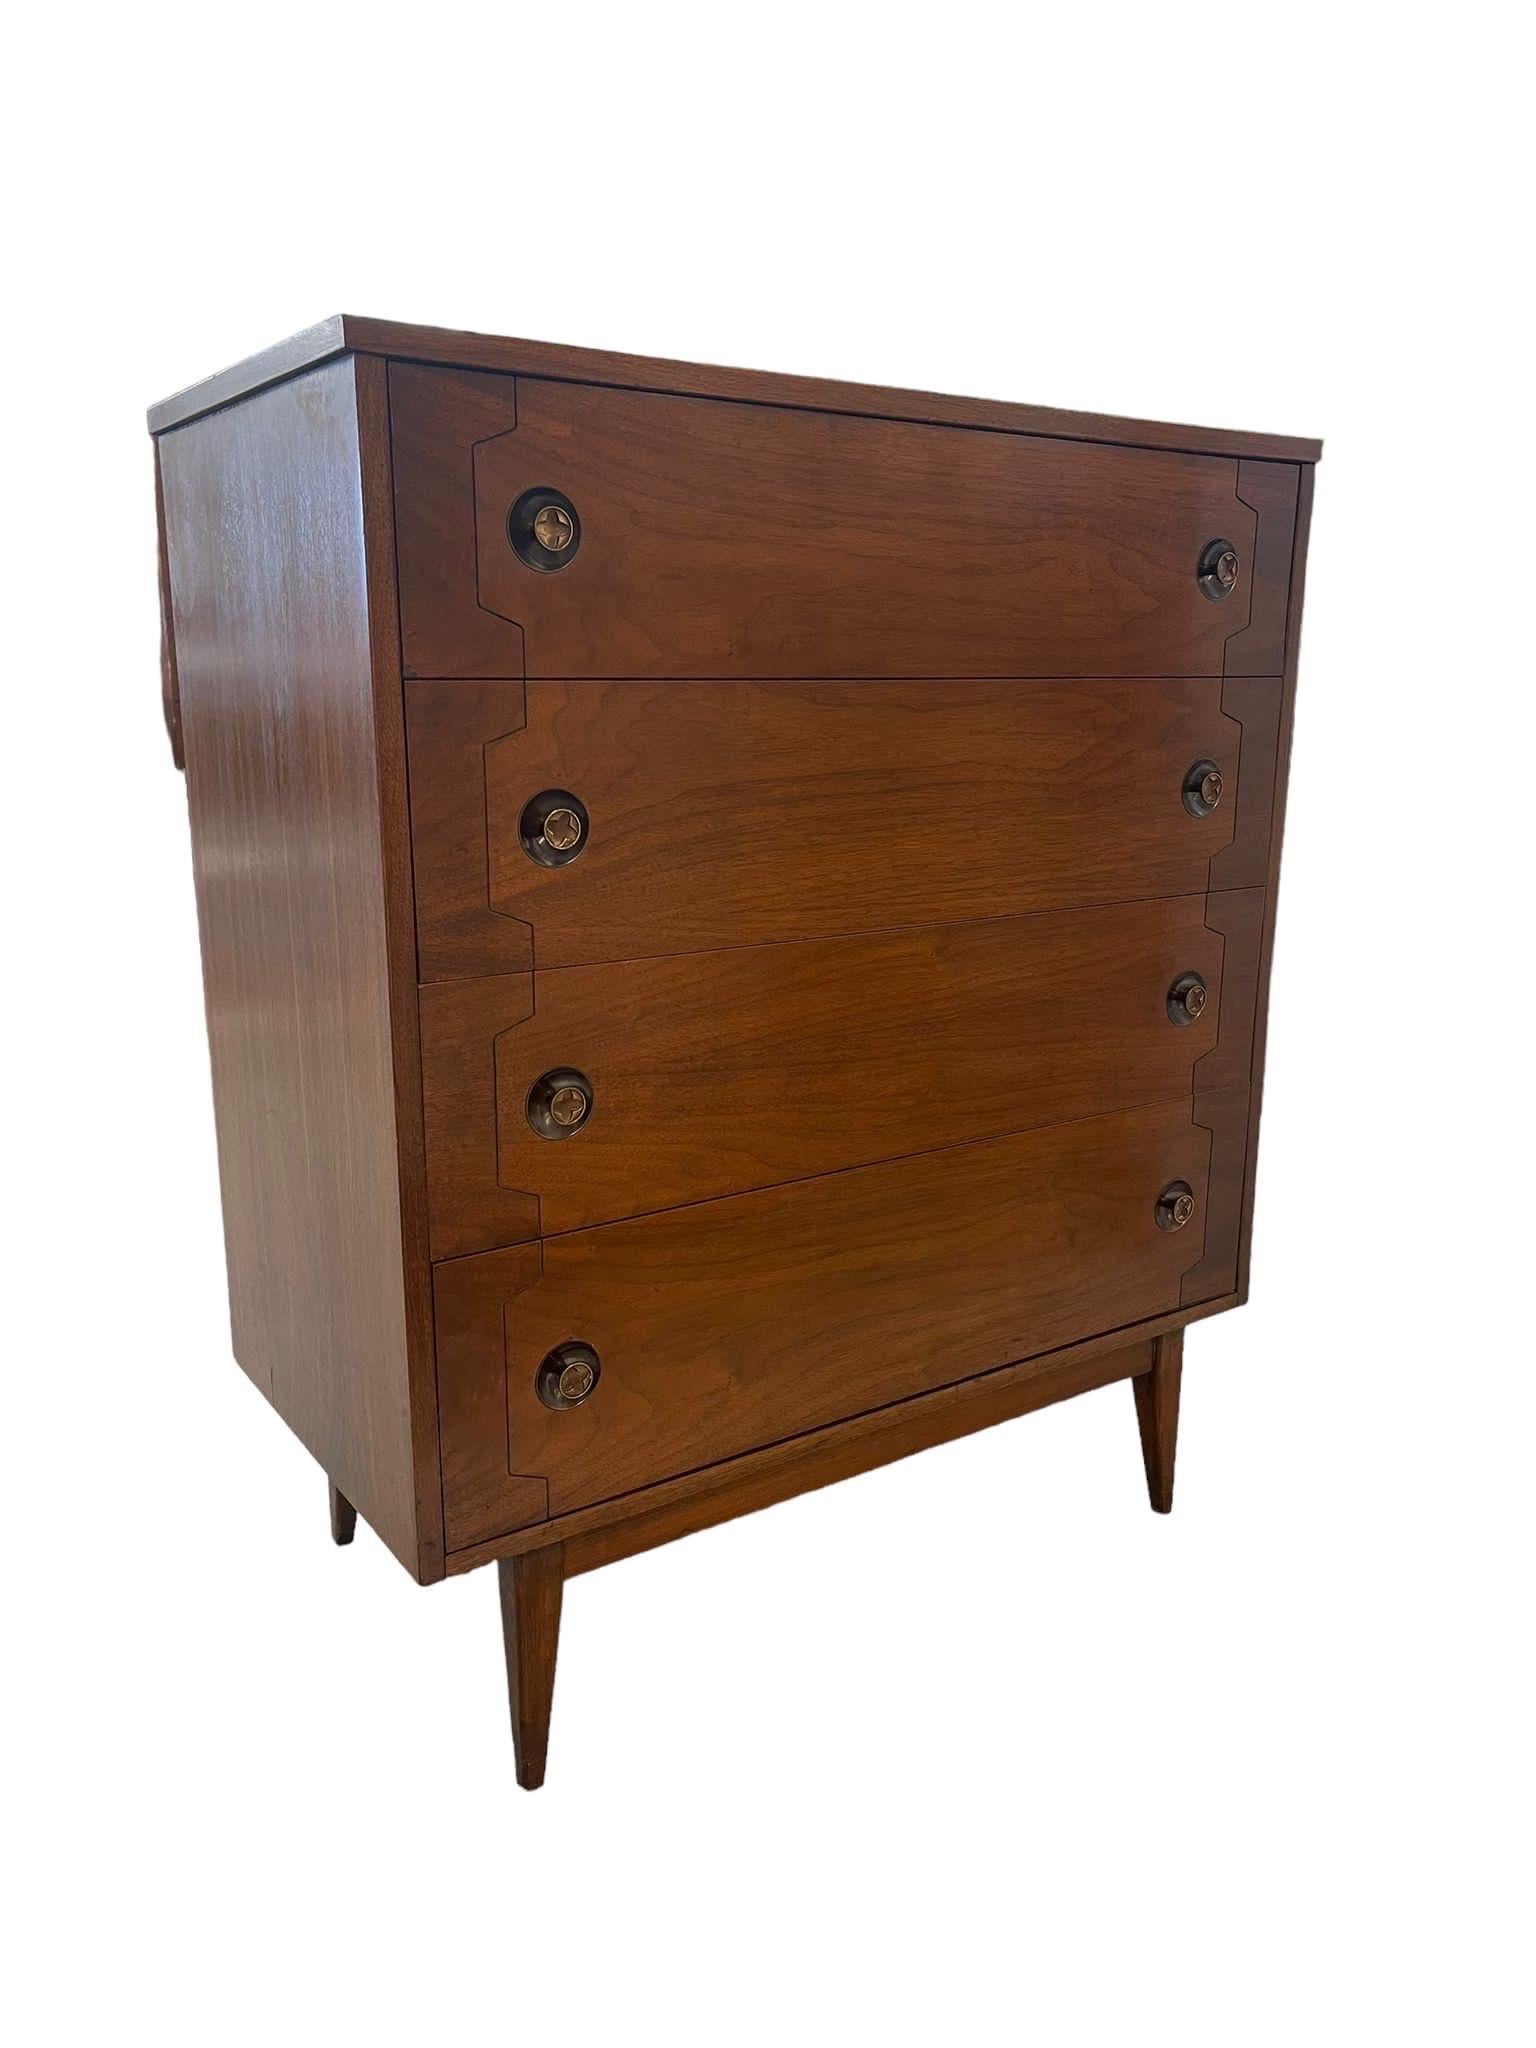 Tallboy Dresser with Unique Circular Hardware Slightly indented into the wood. Geometric Design Featured on the Front of the Dresser Along with Tapered Legs. Vintage Condition Consistent with Age as Pictured.

Dimensions. 36 W ; 18 D ; 42 H